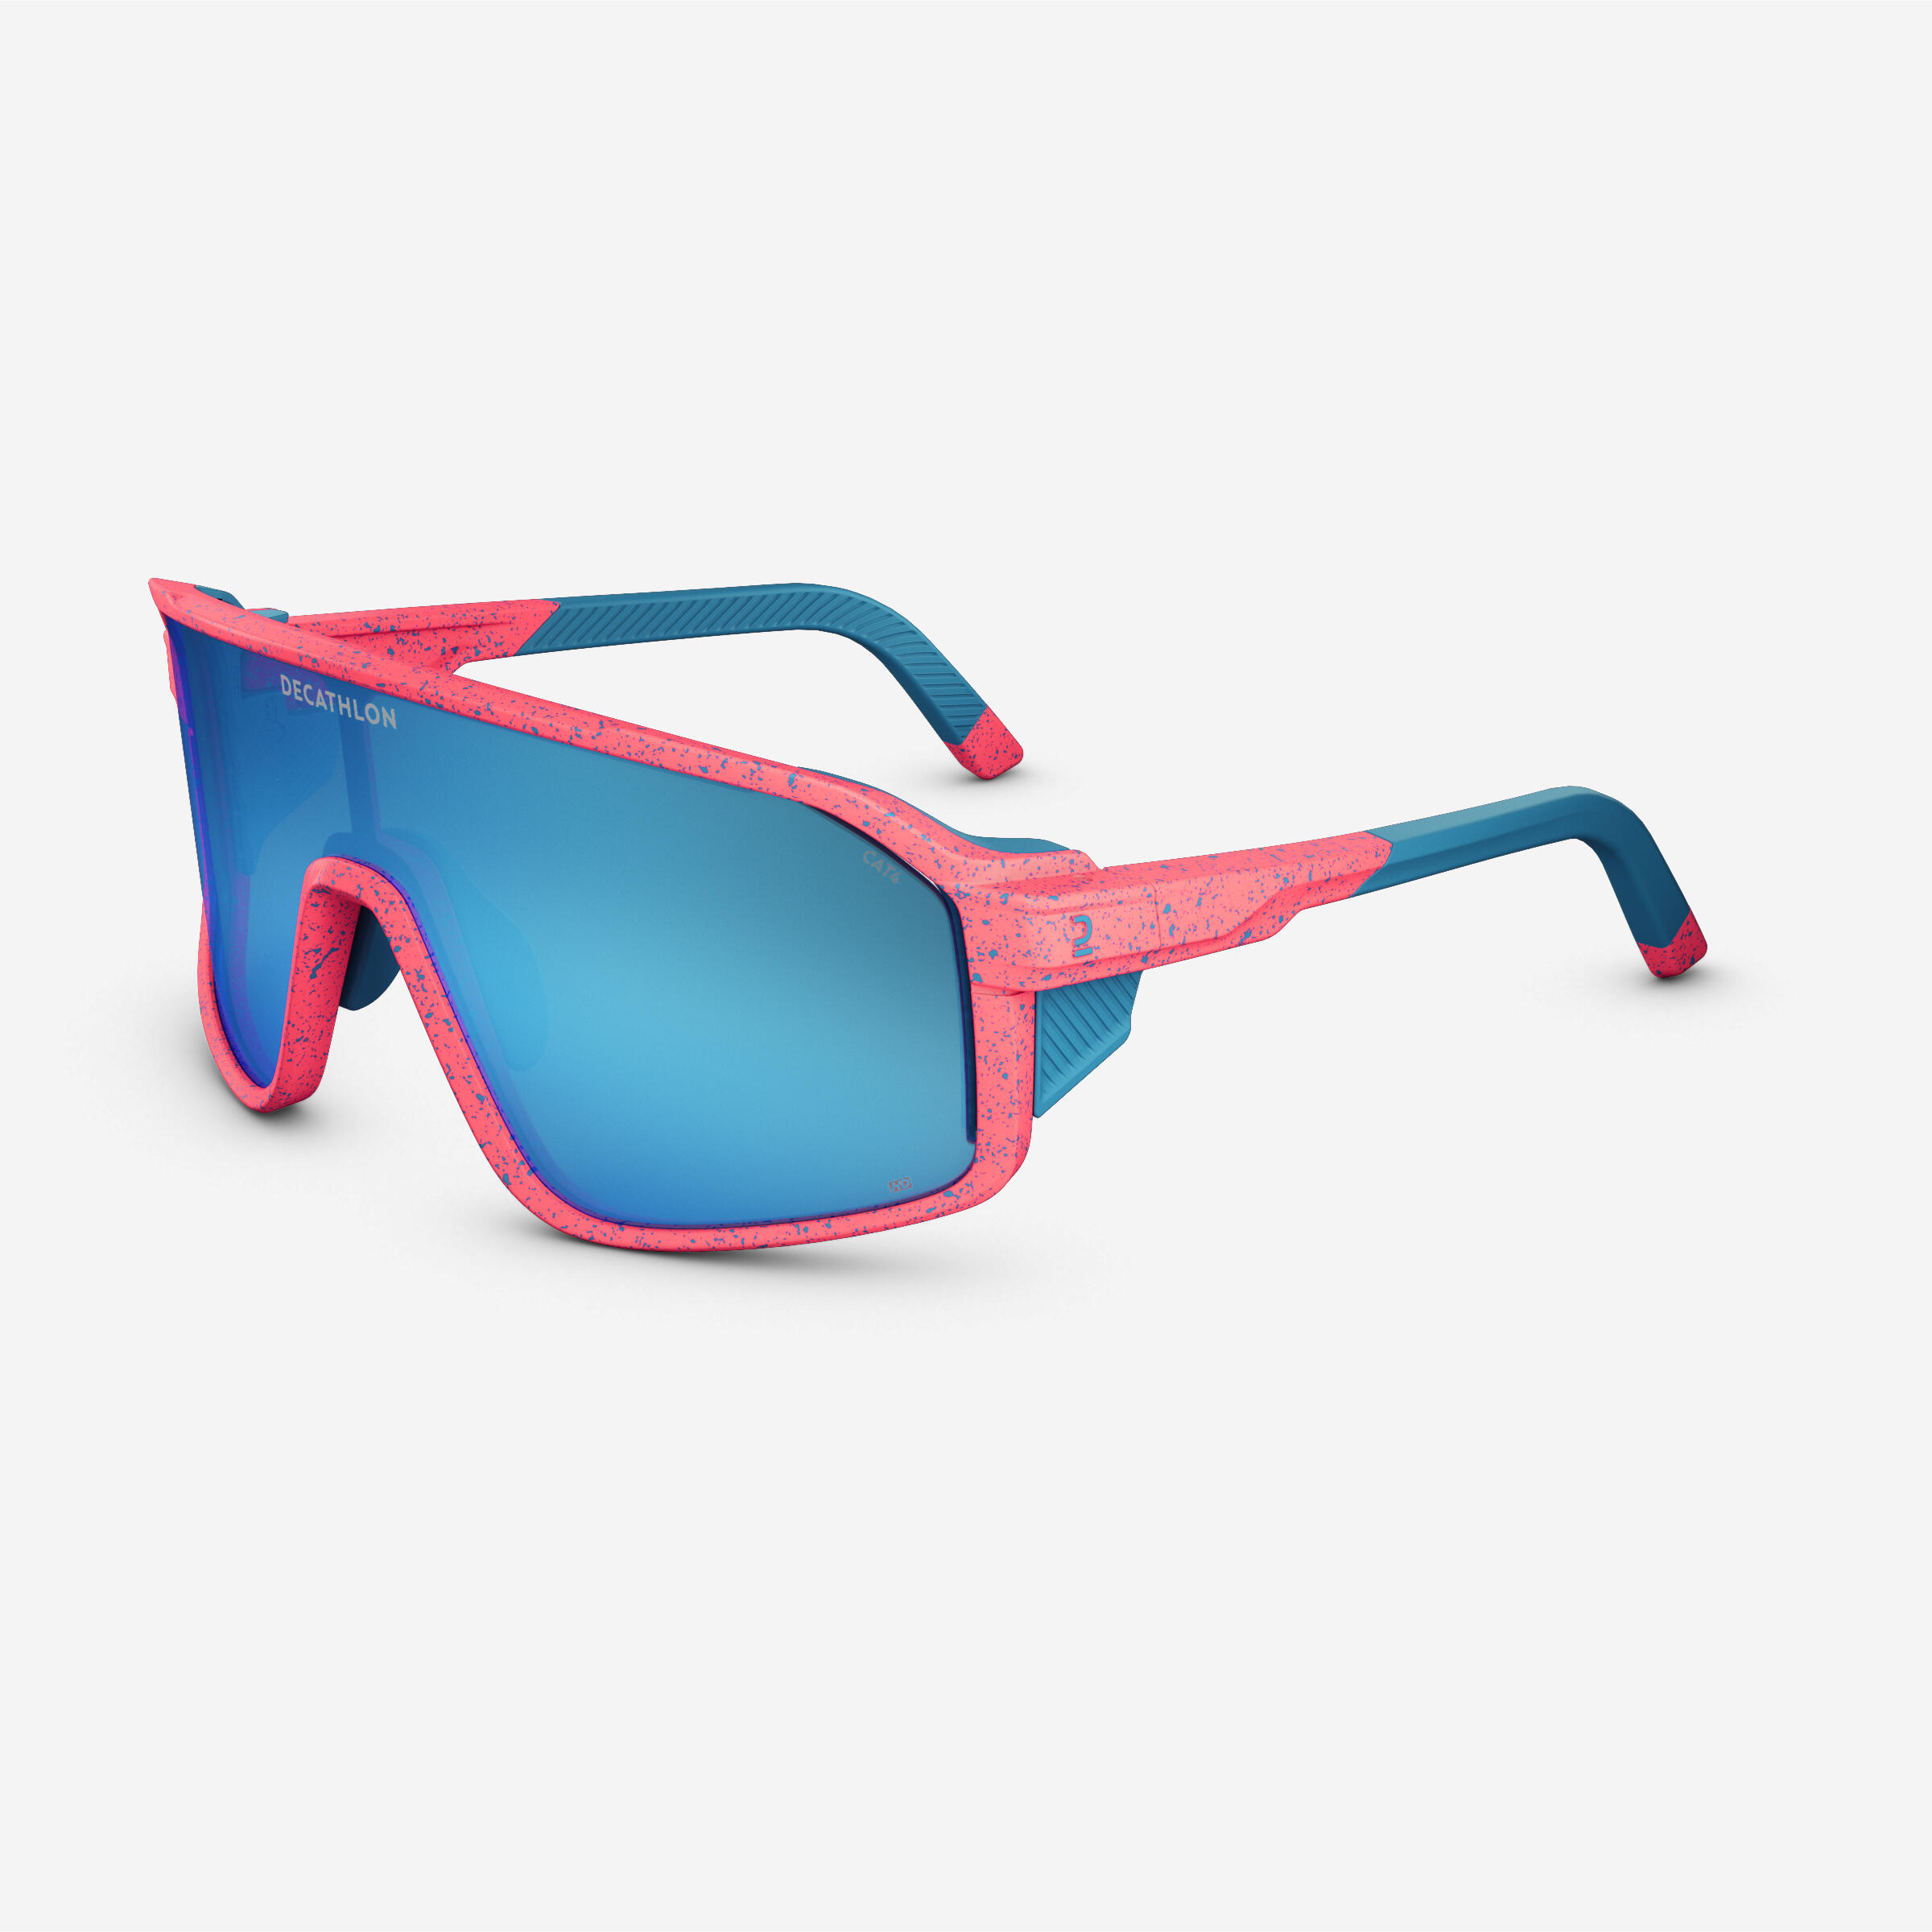 QUECHUA SUNGLASSES MH900 Category 4 Full LENS High Definition - Pink